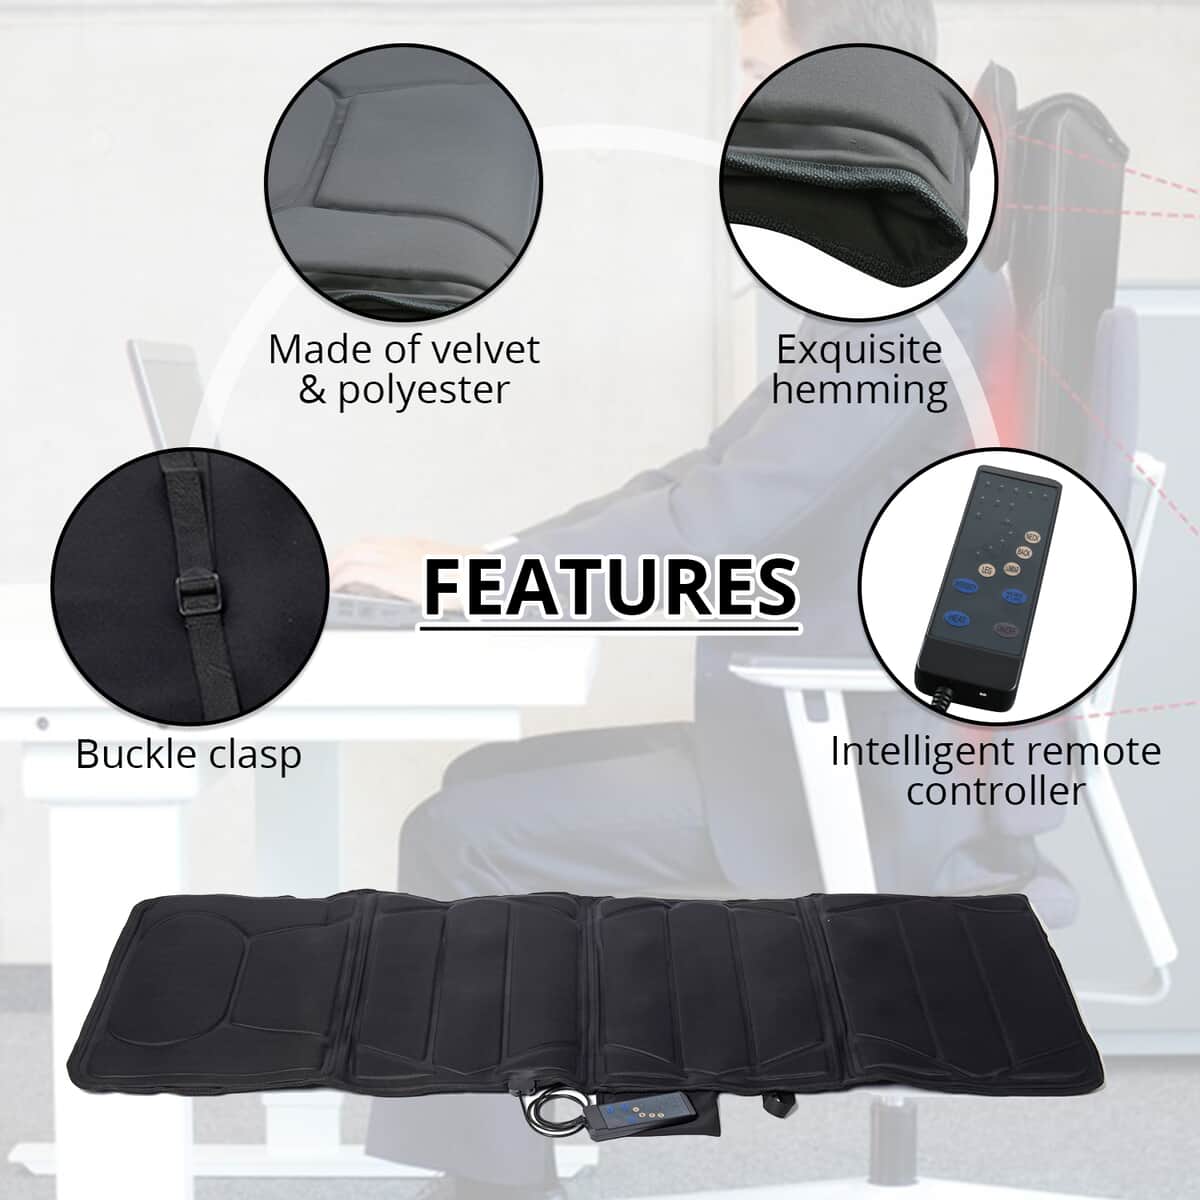 HOMESMART Black Full Body Massaging and Heating Mat with 10 Motors, 5 Modes and 3 Intensity Levels image number 2